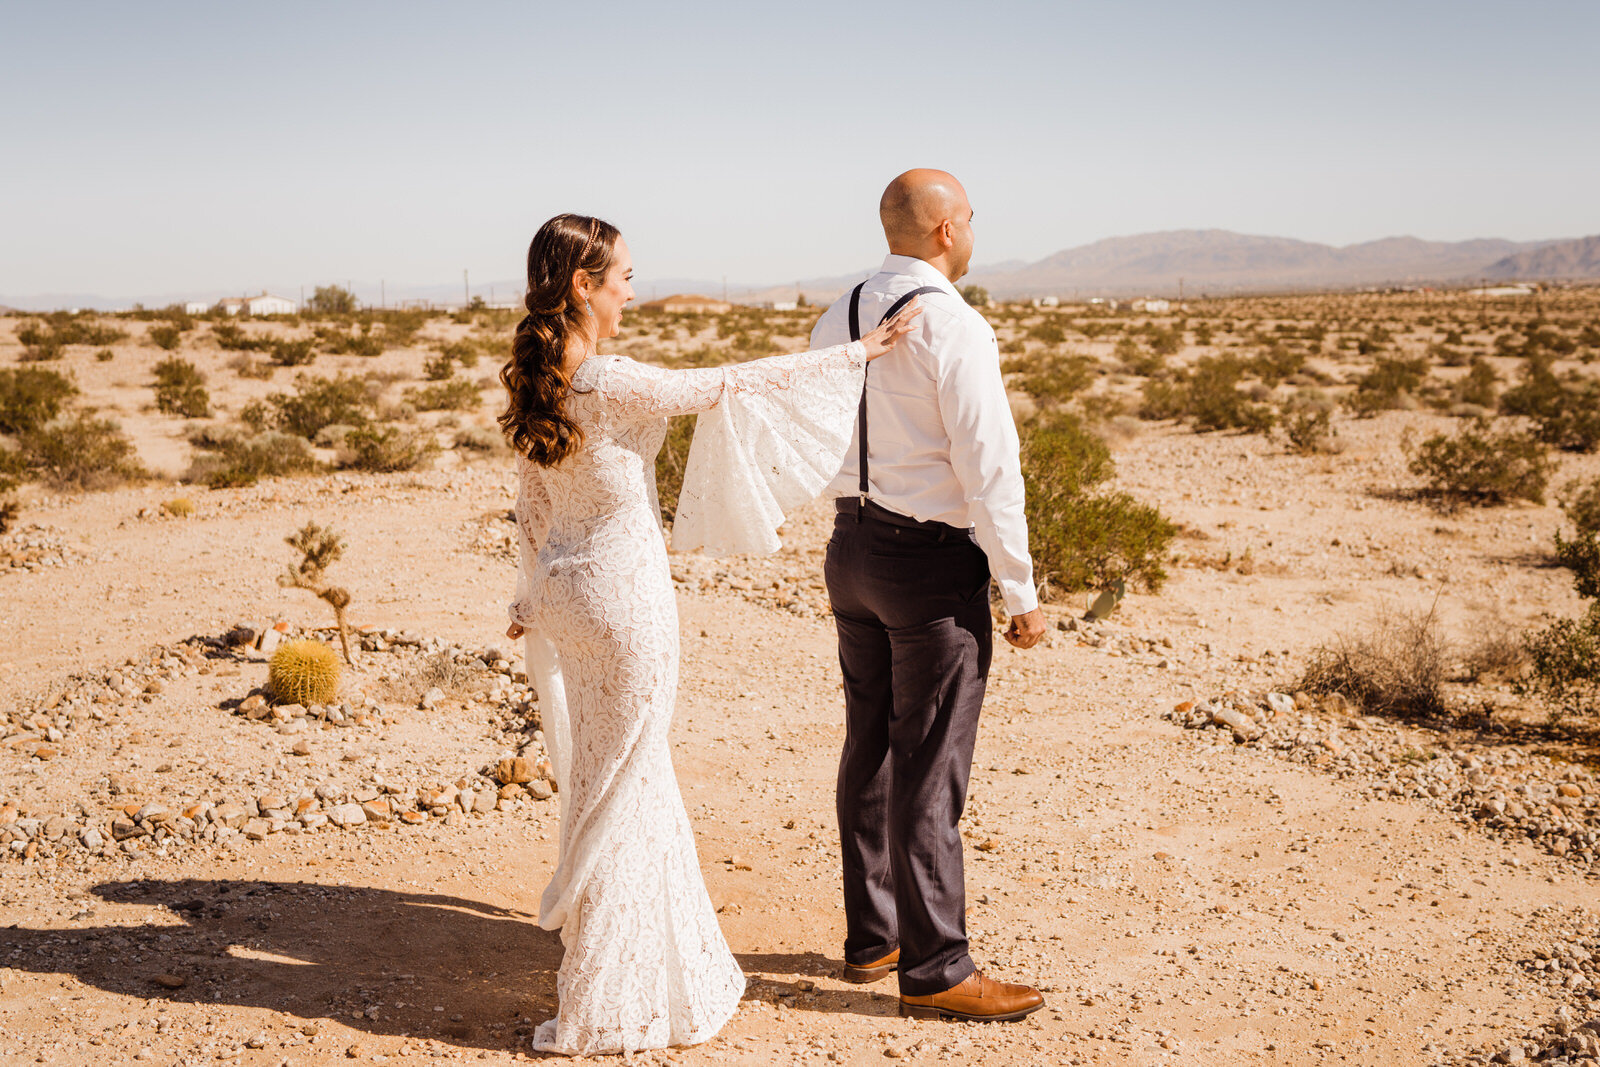 Elopement bride taps groom's shoulder during first look in Joshua Tree | photo by Kept Record | www.keptrecord.com